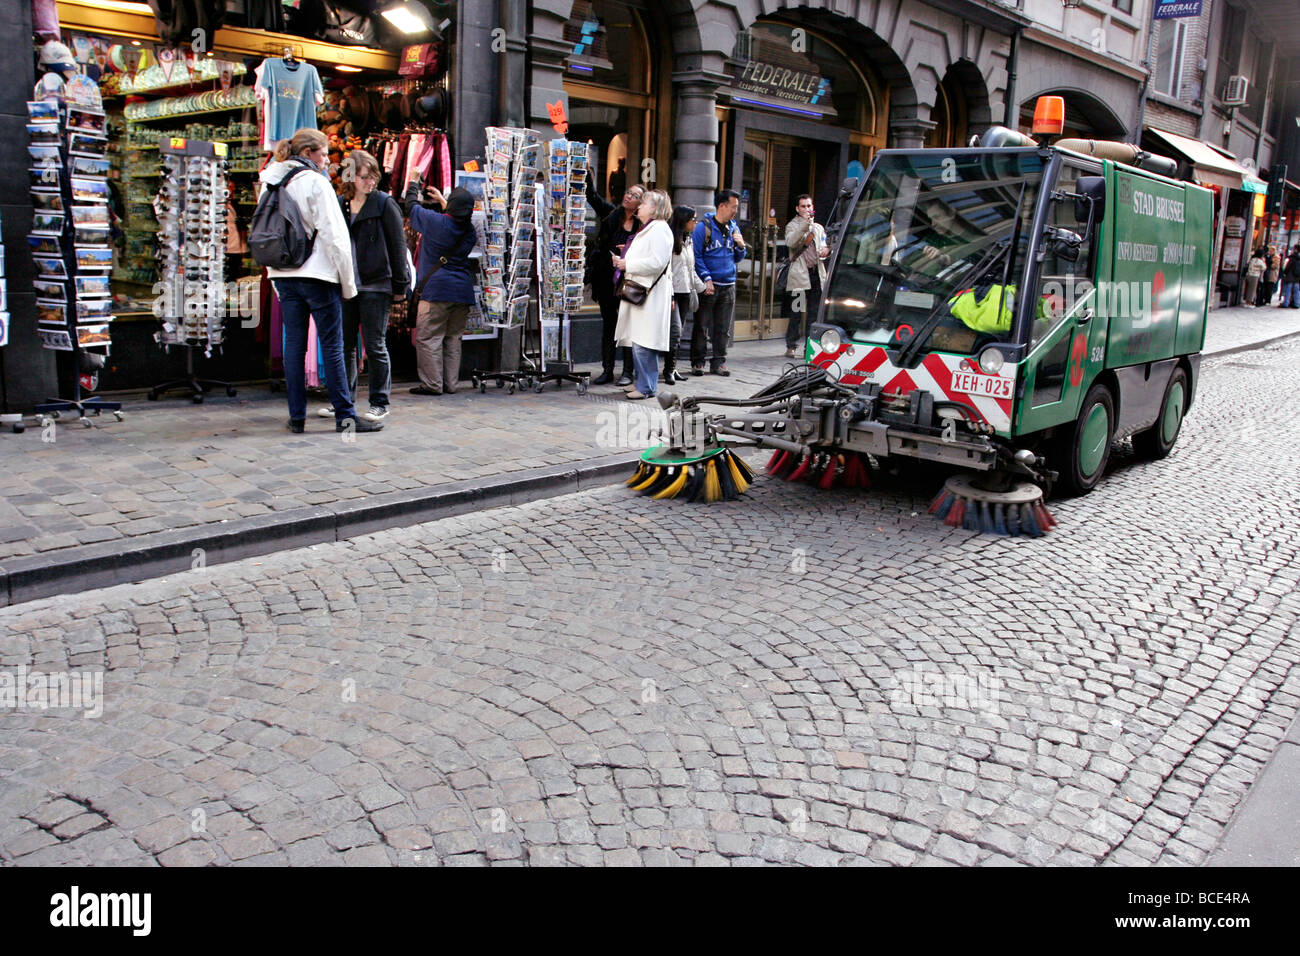 Cleaning up cobble stone street in Brussel, Belgium. Stock Photo